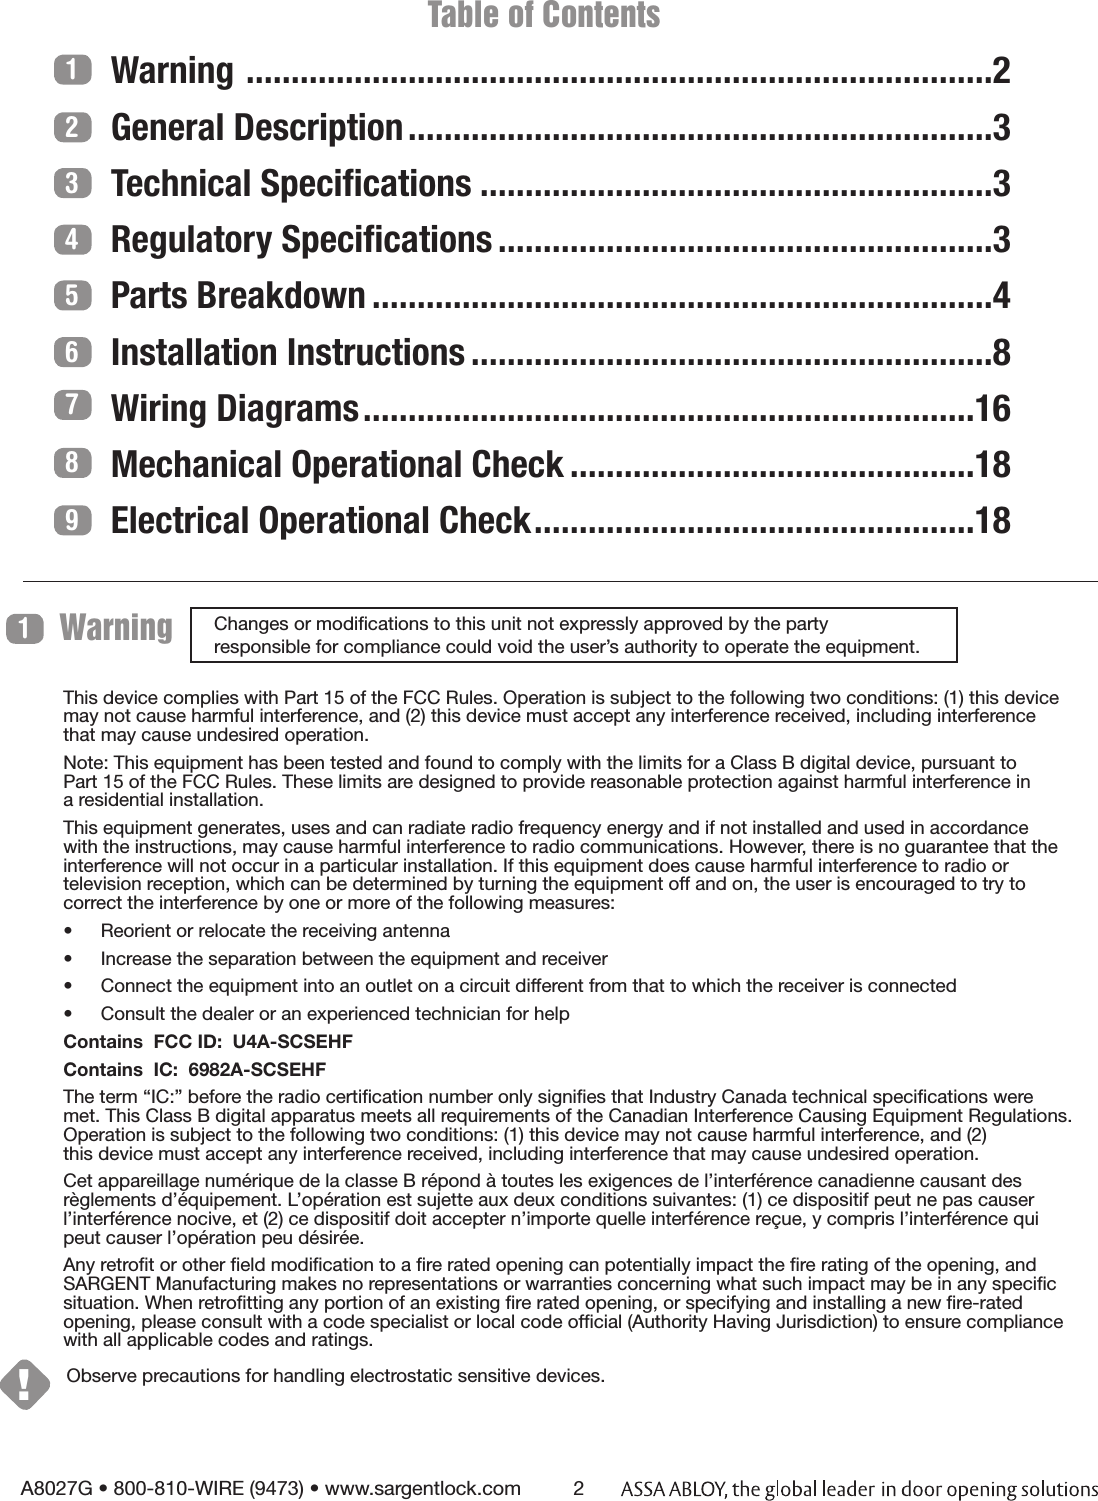            Table of ContentsWarning  ...................................................................................2General Description .................................................................3Technical Speciﬁcations .........................................................3Regulatory Speciﬁcations .......................................................3Parts Breakdown .....................................................................4Installation Instructions ..........................................................8Wiring Diagrams ....................................................................16Mechanical Operational Check .............................................18Electrical Operational Check .................................................18A8027G • 800-810-WIRE (9473) • www.sargentlock.com 2123456789Changes or modiﬁcations to this unit not expressly approved by the party  responsible for compliance could void the user’s authority to operate the equipment.This device complies with Part 15 of the FCC Rules. Operation is subject to the following two conditions: (1) this device may not cause harmful interference, and (2) this device must accept any interference received, including interference  that may cause undesired operation.Note: This equipment has been tested and found to comply with the limits for a Class B digital device, pursuant to  Part 15 of the FCC Rules. These limits are designed to provide reasonable protection against harmful interference in  a residential installation.This equipment generates, uses and can radiate radio frequency energy and if not installed and used in accordance  with the instructions, may cause harmful interference to radio communications. However, there is no guarantee that the interference will not occur in a particular installation. If this equipment does cause harmful interference to radio or  television reception, which can be determined by turning the equipment off and on, the user is encouraged to try to  correct the interference by one or more of the following measures:•  Reorient or relocate the receiving antenna•  Increase the separation between the equipment and receiver•  Connect the equipment into an outlet on a circuit different from that to which the receiver is connected•  Consult the dealer or an experienced technician for helpContains  FCC ID:  U4A-SCSEHF Contains  IC:  6982A-SCSEHF The term “IC:” before the radio certiﬁcation number only signiﬁes that Industry Canada technical speciﬁcations were met. This Class B digital apparatus meets all requirements of the Canadian Interference Causing Equipment Regulations. Operation is subject to the following two conditions: (1) this device may not cause harmful interference, and (2)  this device must accept any interference received, including interference that may cause undesired operation. Cet appareillage numérique de la classe B répond à toutes les exigences de l’interférence canadienne causant des règlements d’équipement. L’opération est sujette aux deux conditions suivantes: (1) ce dispositif peut ne pas causer l’interférence nocive, et (2) ce dispositif doit accepter n’importe quelle interférence reçue, y compris l’interférence qui peut causer l’opération peu désirée.Any retroﬁt or other ﬁeld modiﬁcation to a ﬁre rated opening can potentially impact the ﬁre rating of the opening, and SARGENT Manufacturing makes no representations or warranties concerning what such impact may be in any speciﬁc situation. When retroﬁtting any portion of an existing ﬁre rated opening, or specifying and installing a new ﬁre-rated opening, please consult with a code specialist or local code ofﬁcial (Authority Having Jurisdiction) to ensure compliance with all applicable codes and ratings. Warning 1Observe precautions for handling electrostatic sensitive devices.!